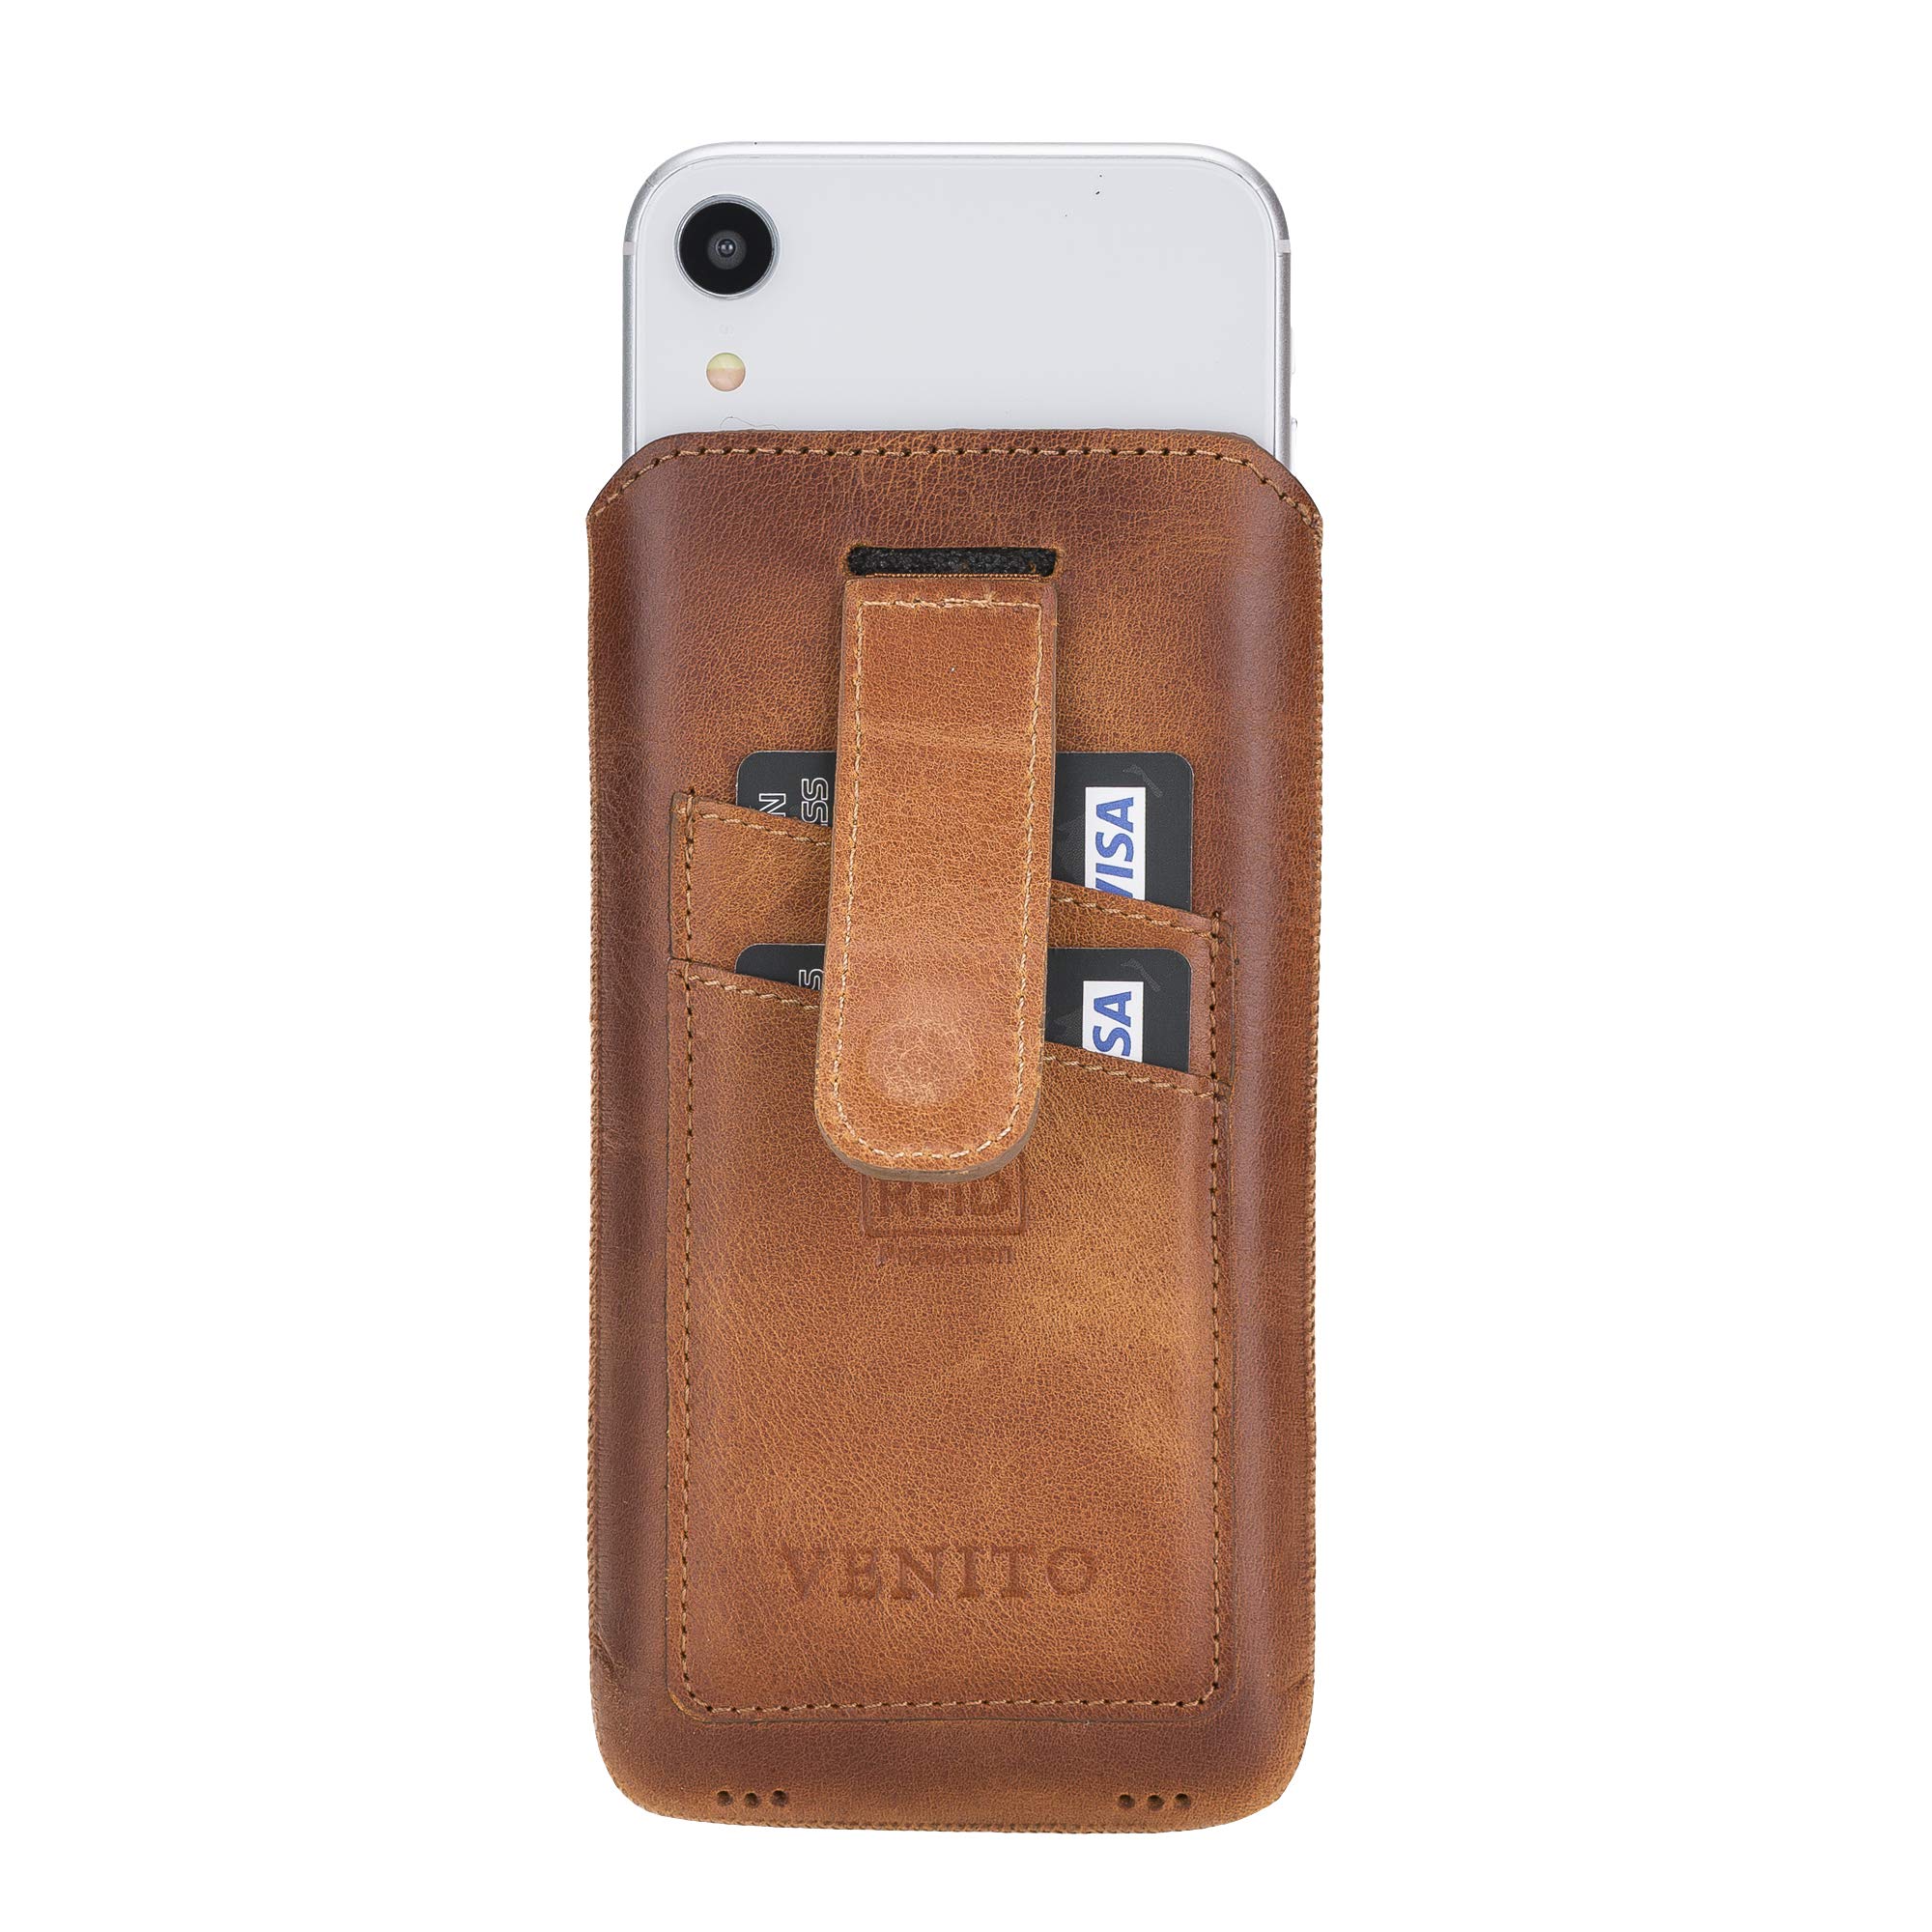 Venito Prato Universal Leather Pouch Case Compatible with iPhone 13 Pro, iPhone 13, iPhone 12, iPhone 12 Pro, iPhone XR and iPhone 11, Galaxy S20, Galaxy S21 - Antique Brown